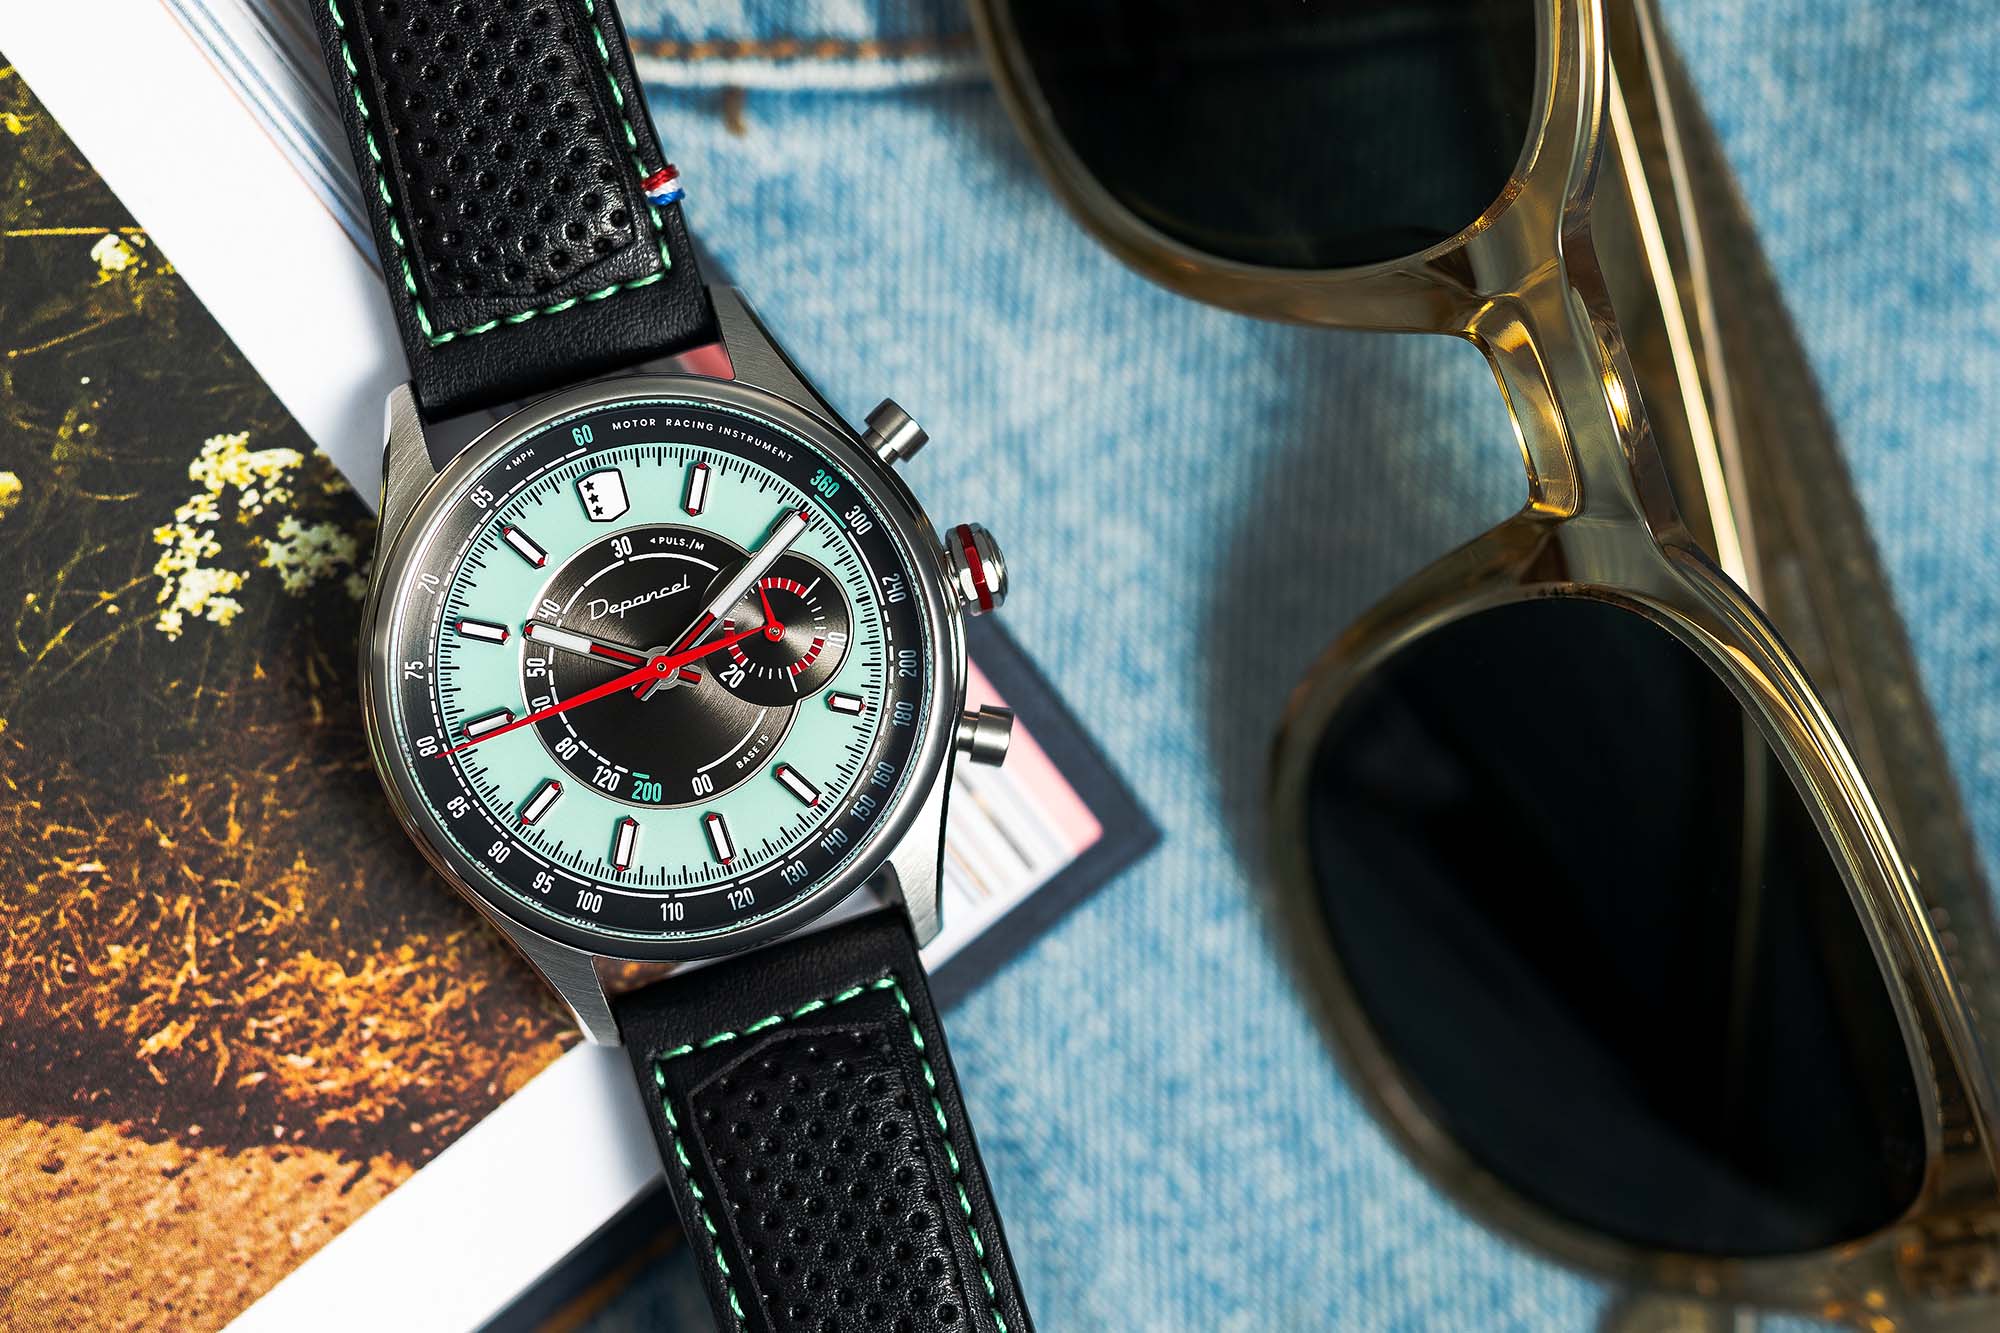 Introducing: The Mint-Green Depancel × Worn & Wound Allure Powered By A Vintage Valjoux 92 Movement